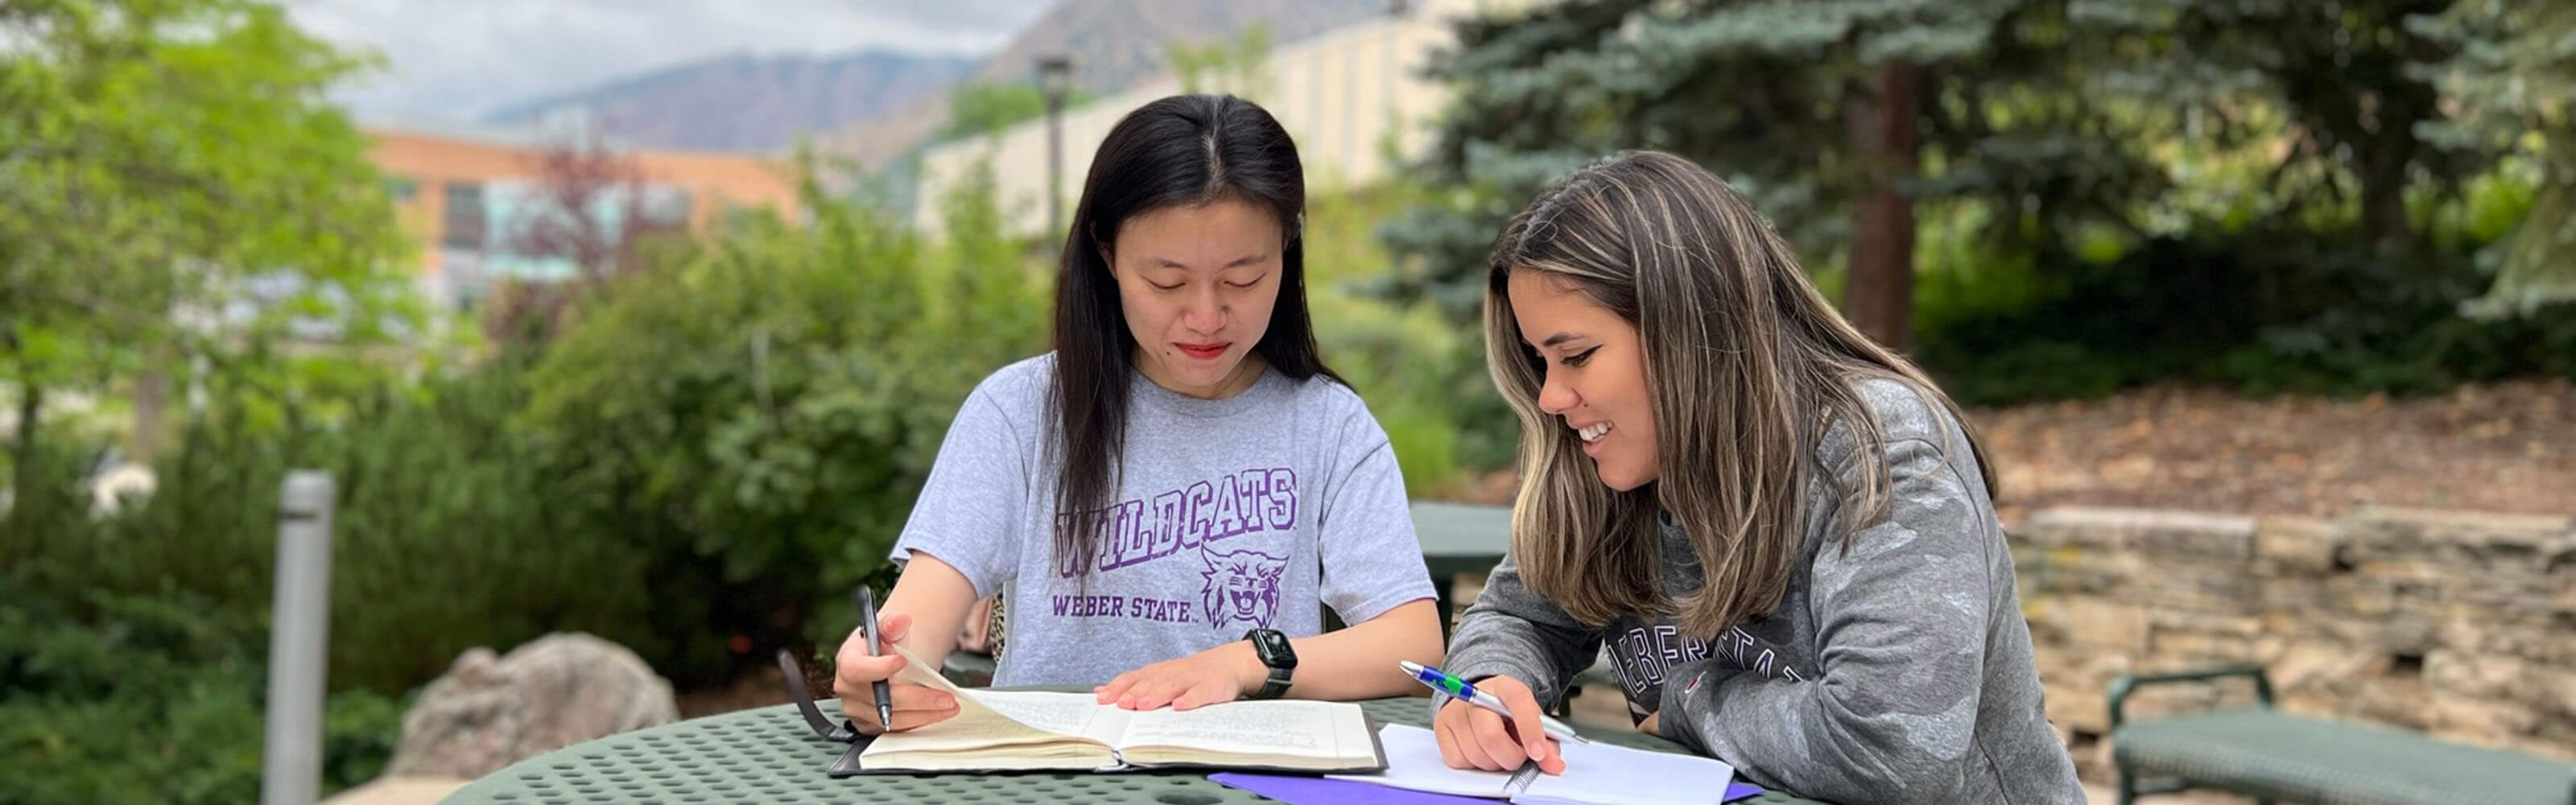 Two new students studying at a table outside at Weber State University.